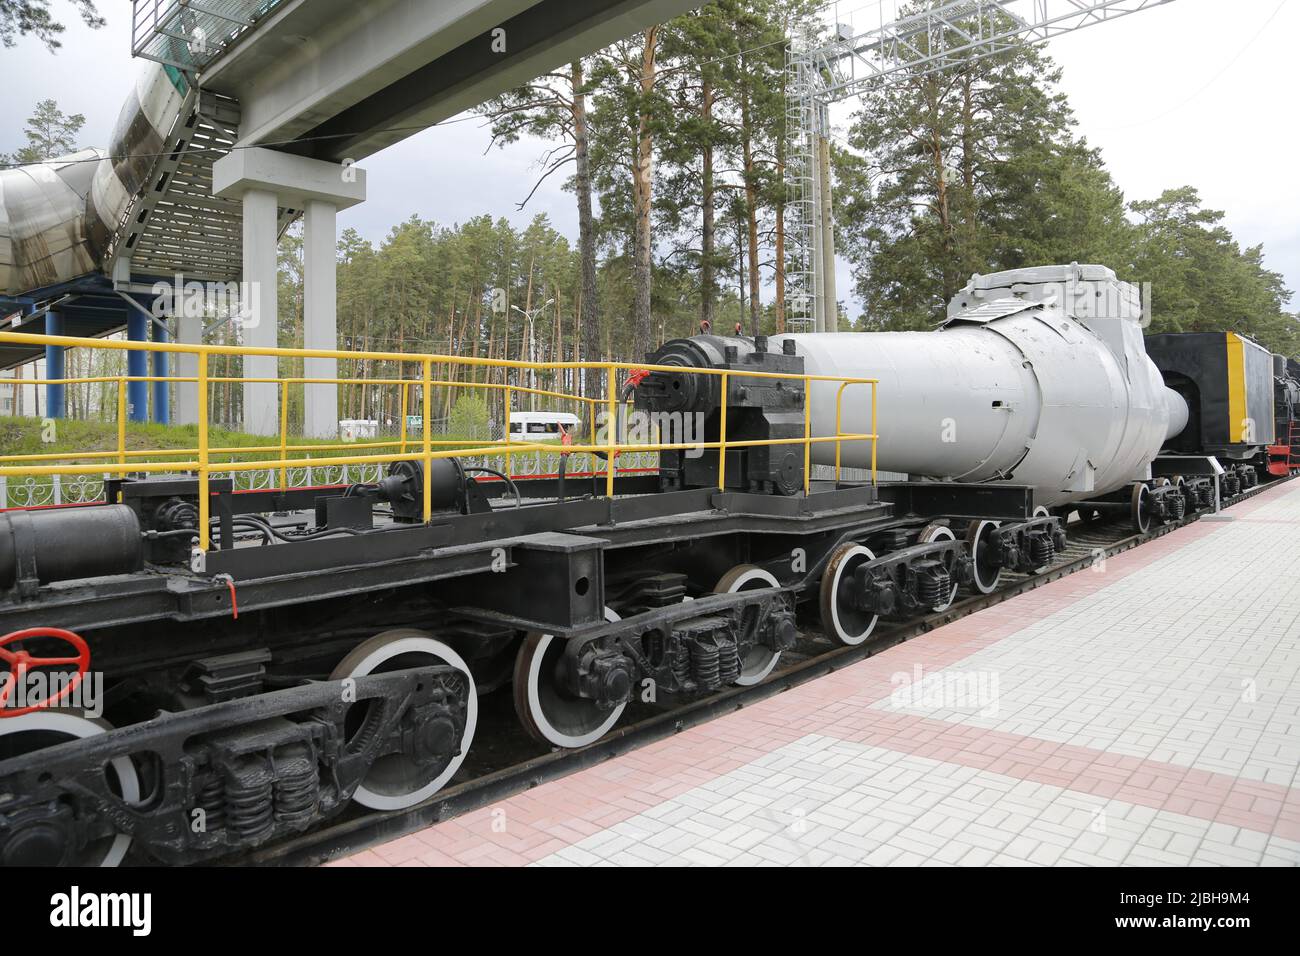 Russian freight train with mixer for transportation of liquid iron, photographed in Museum for Railway Technology Novosibirsk; torpedo car, Чугуновоз Stock Photo